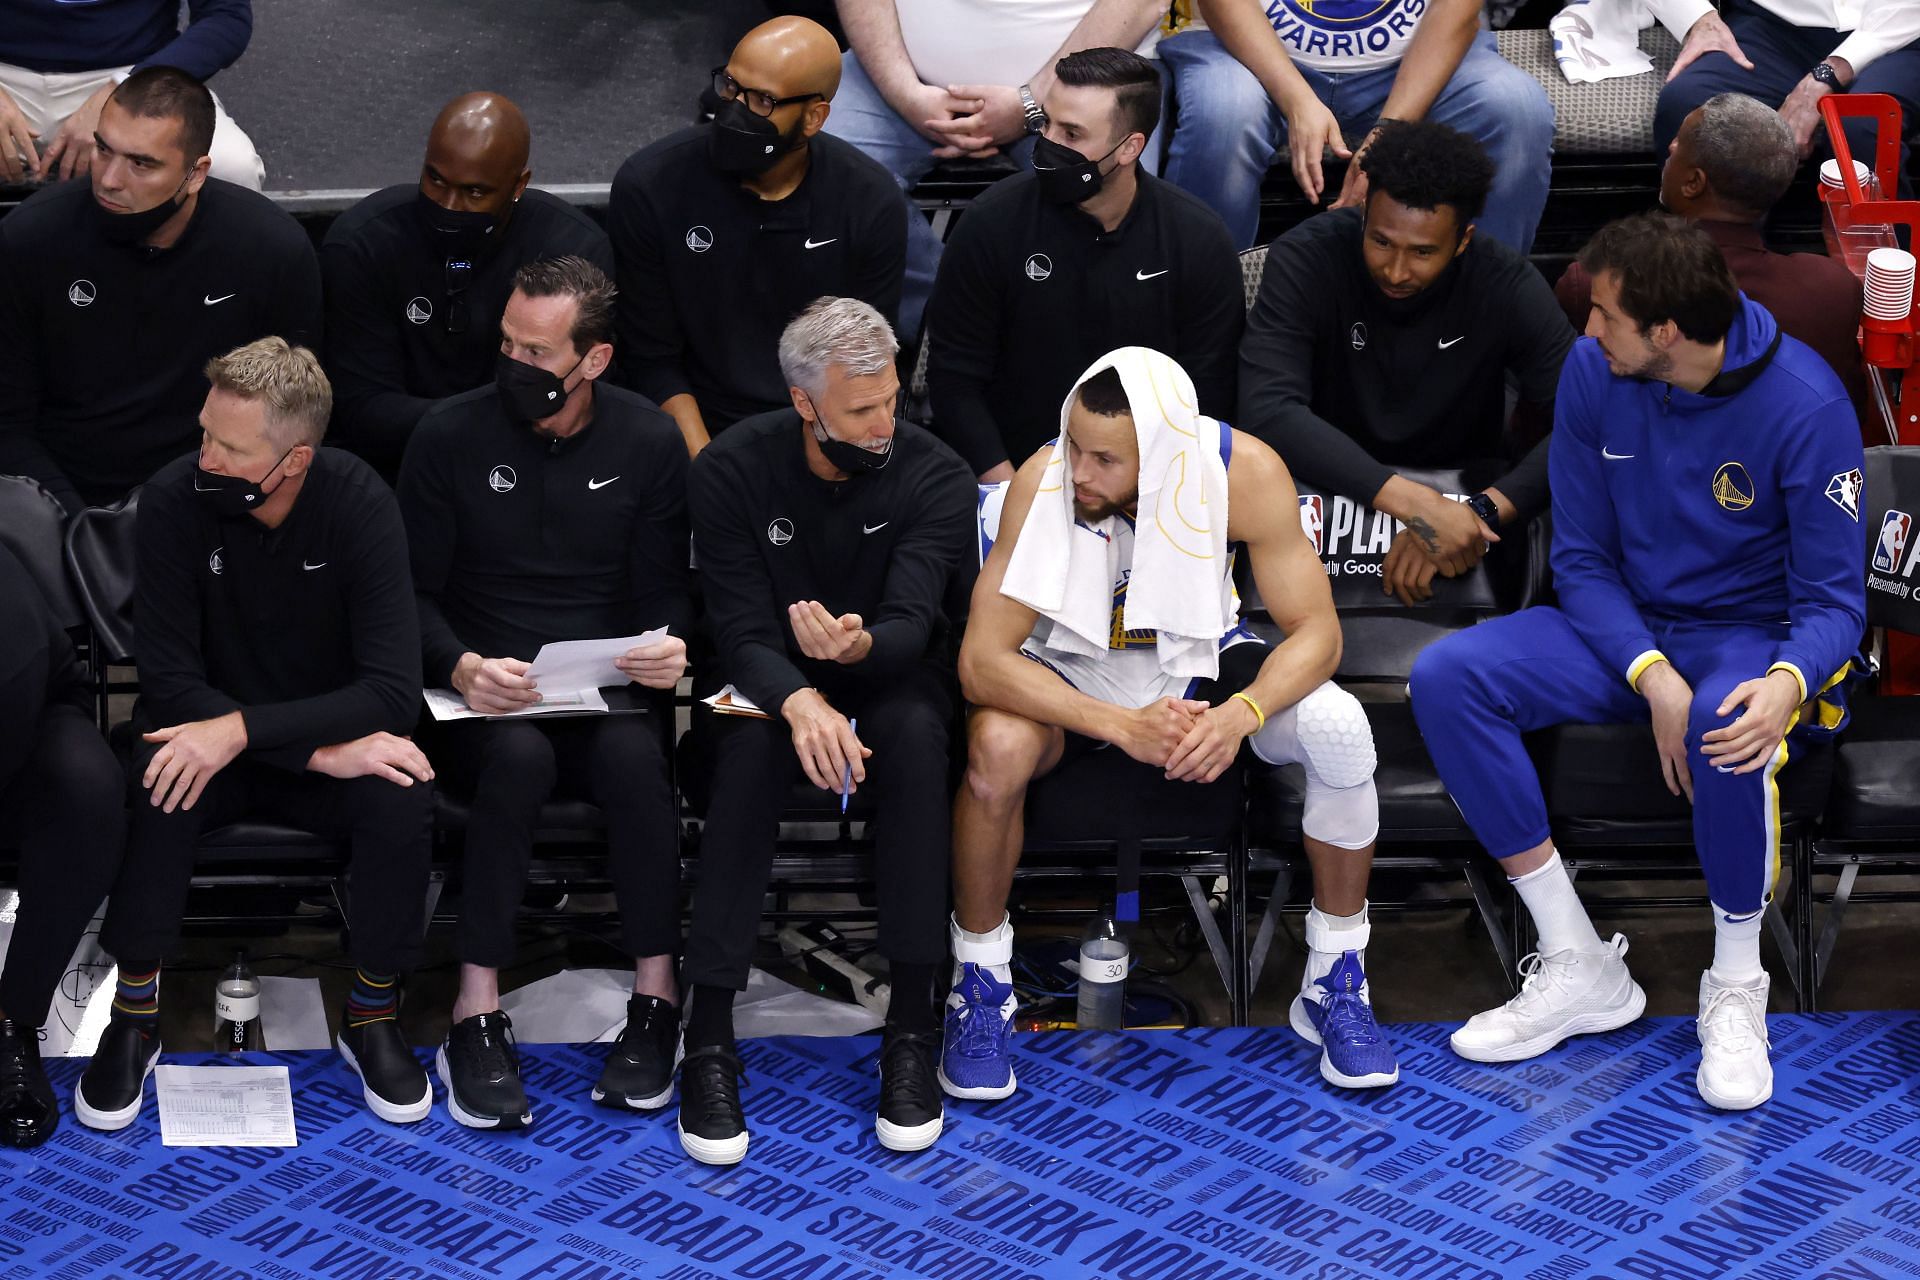 Steph Curry of the Golden State Warriors looks on from the bench with his assistant coaches.